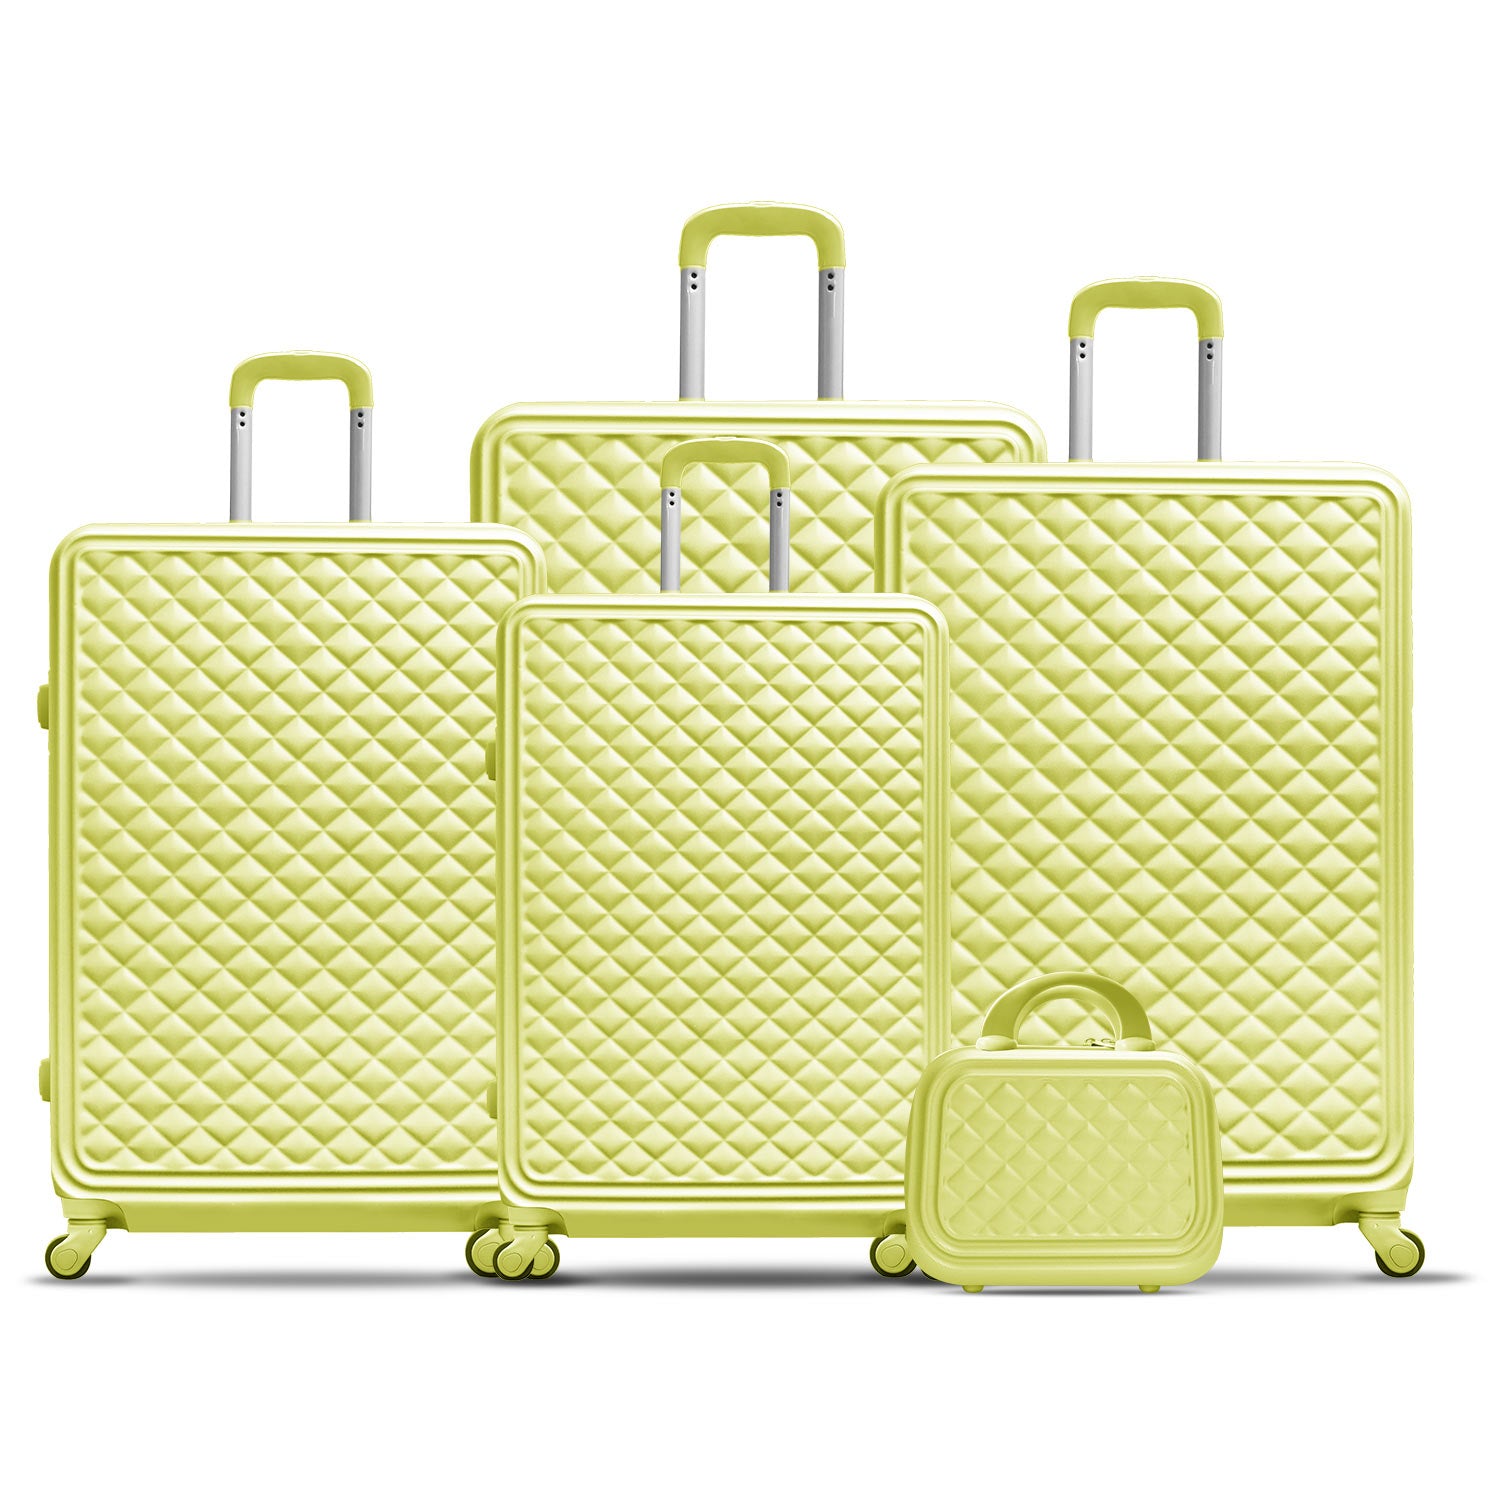 SUMO X-VOYAGER ABS LUGGAGE 5PC SET (12/20/24/28/32")